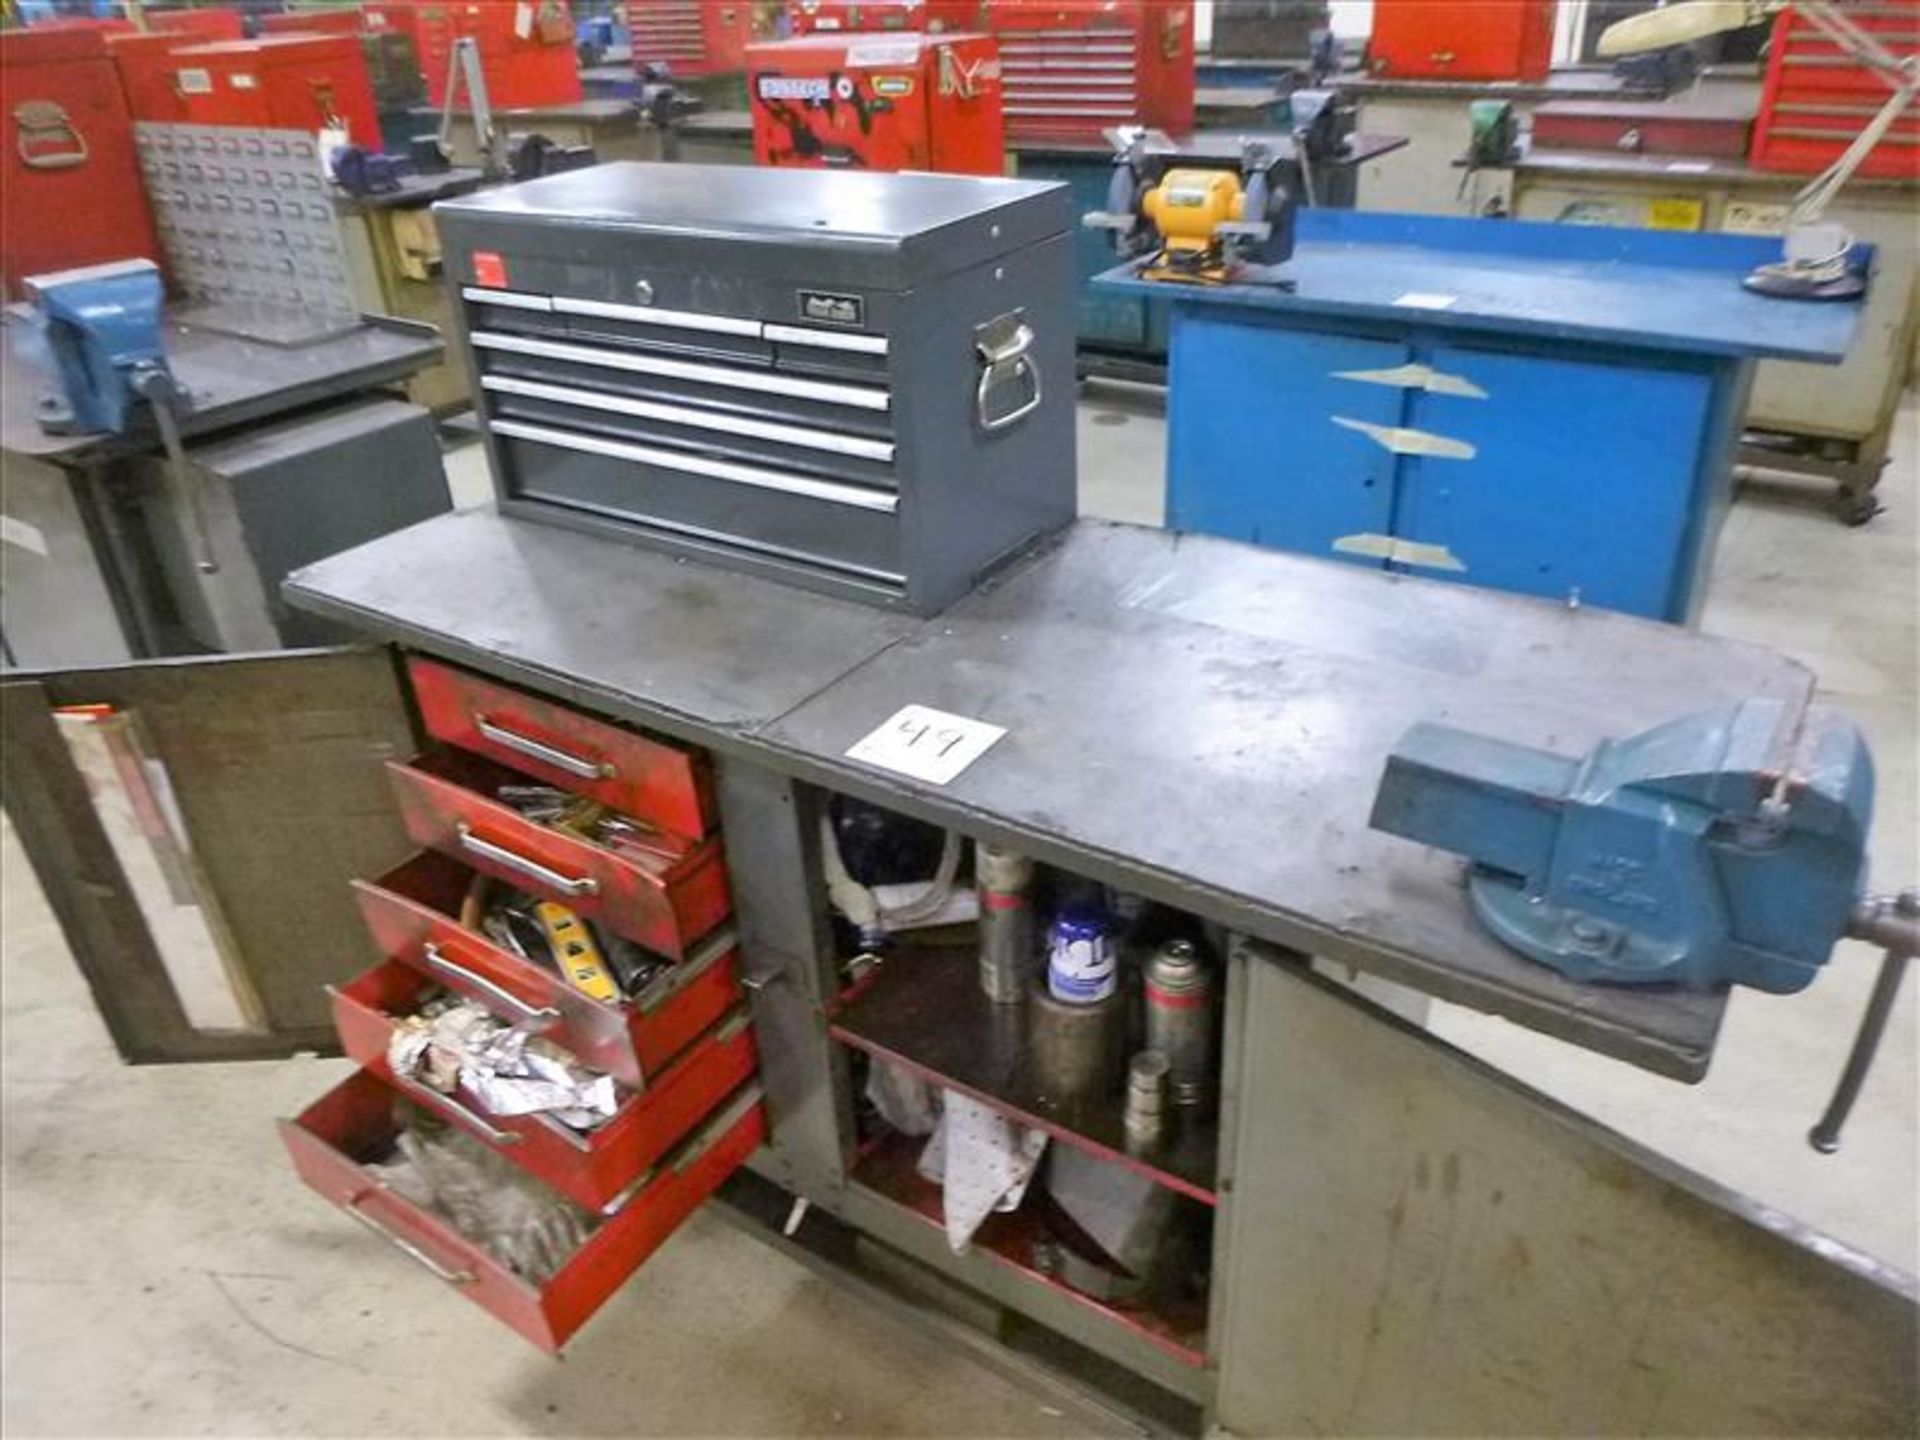 Rolling Work Bench, approx. 24" x 60" c/w 4" Bench Vice & Contents (Hand Tools, Spare Parts, - Image 3 of 4